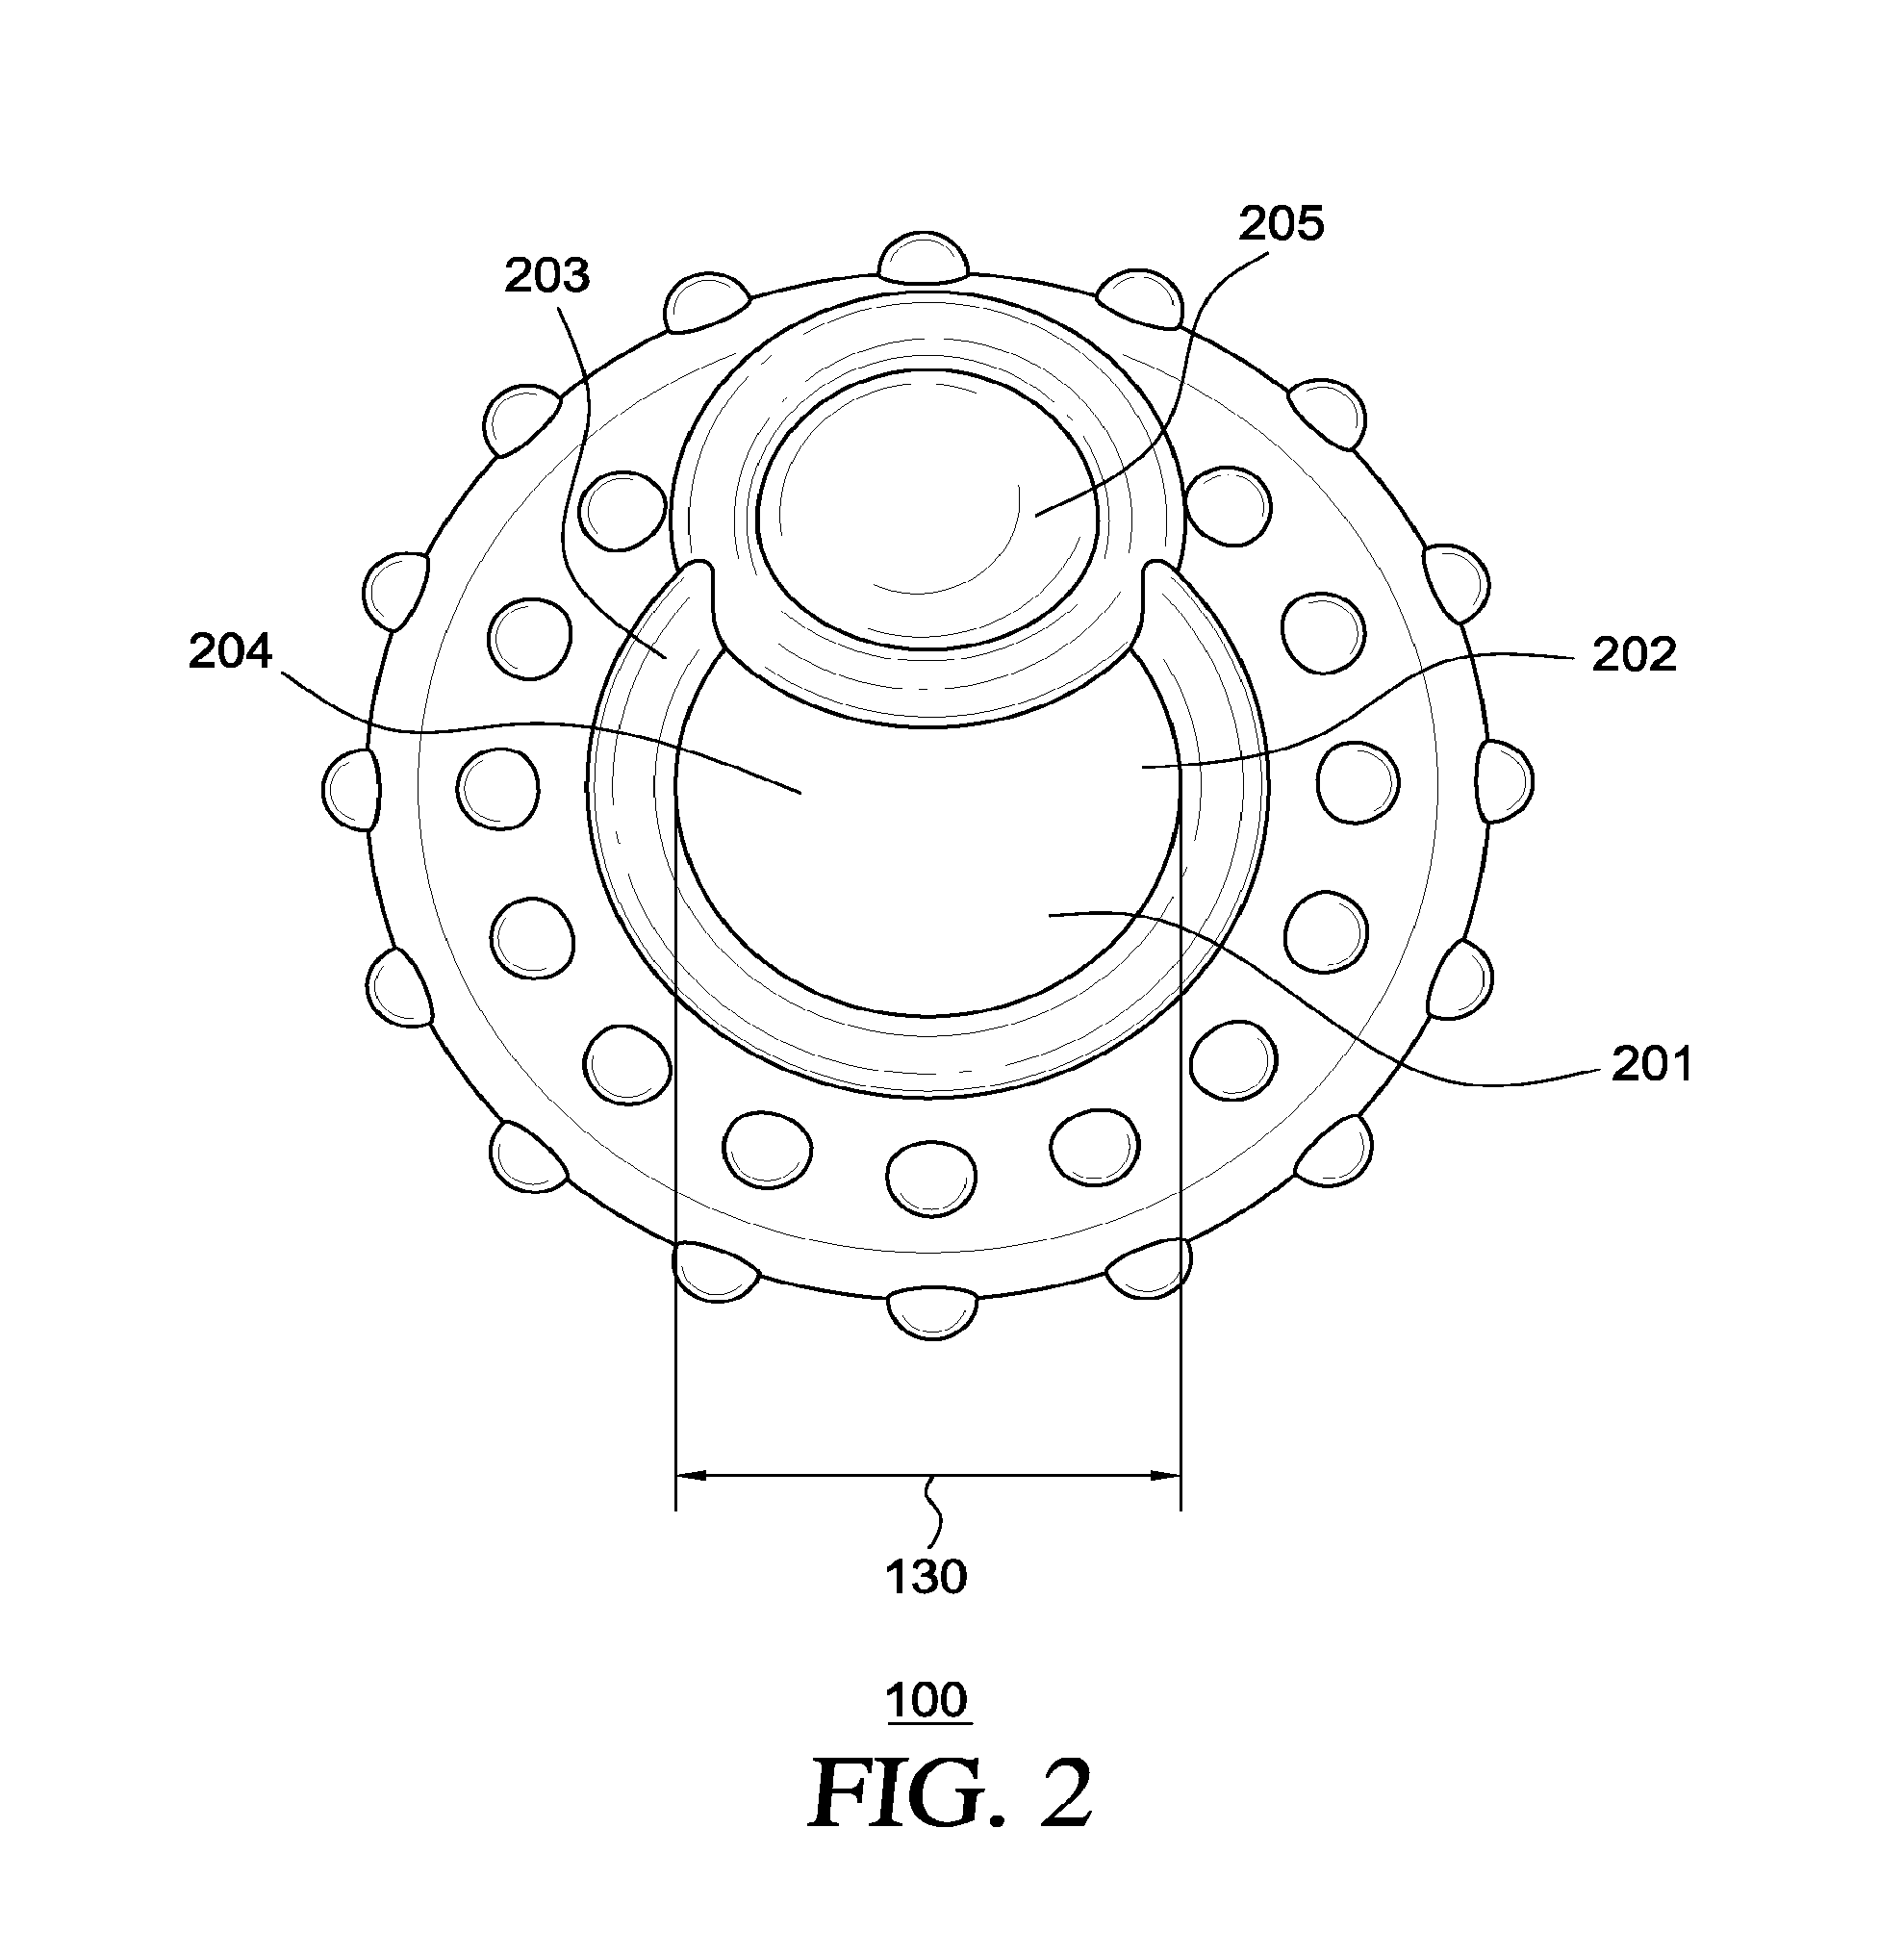 Adaptive cover for sealing multiple objects having irregular shapes and method of using and manufacturing the same